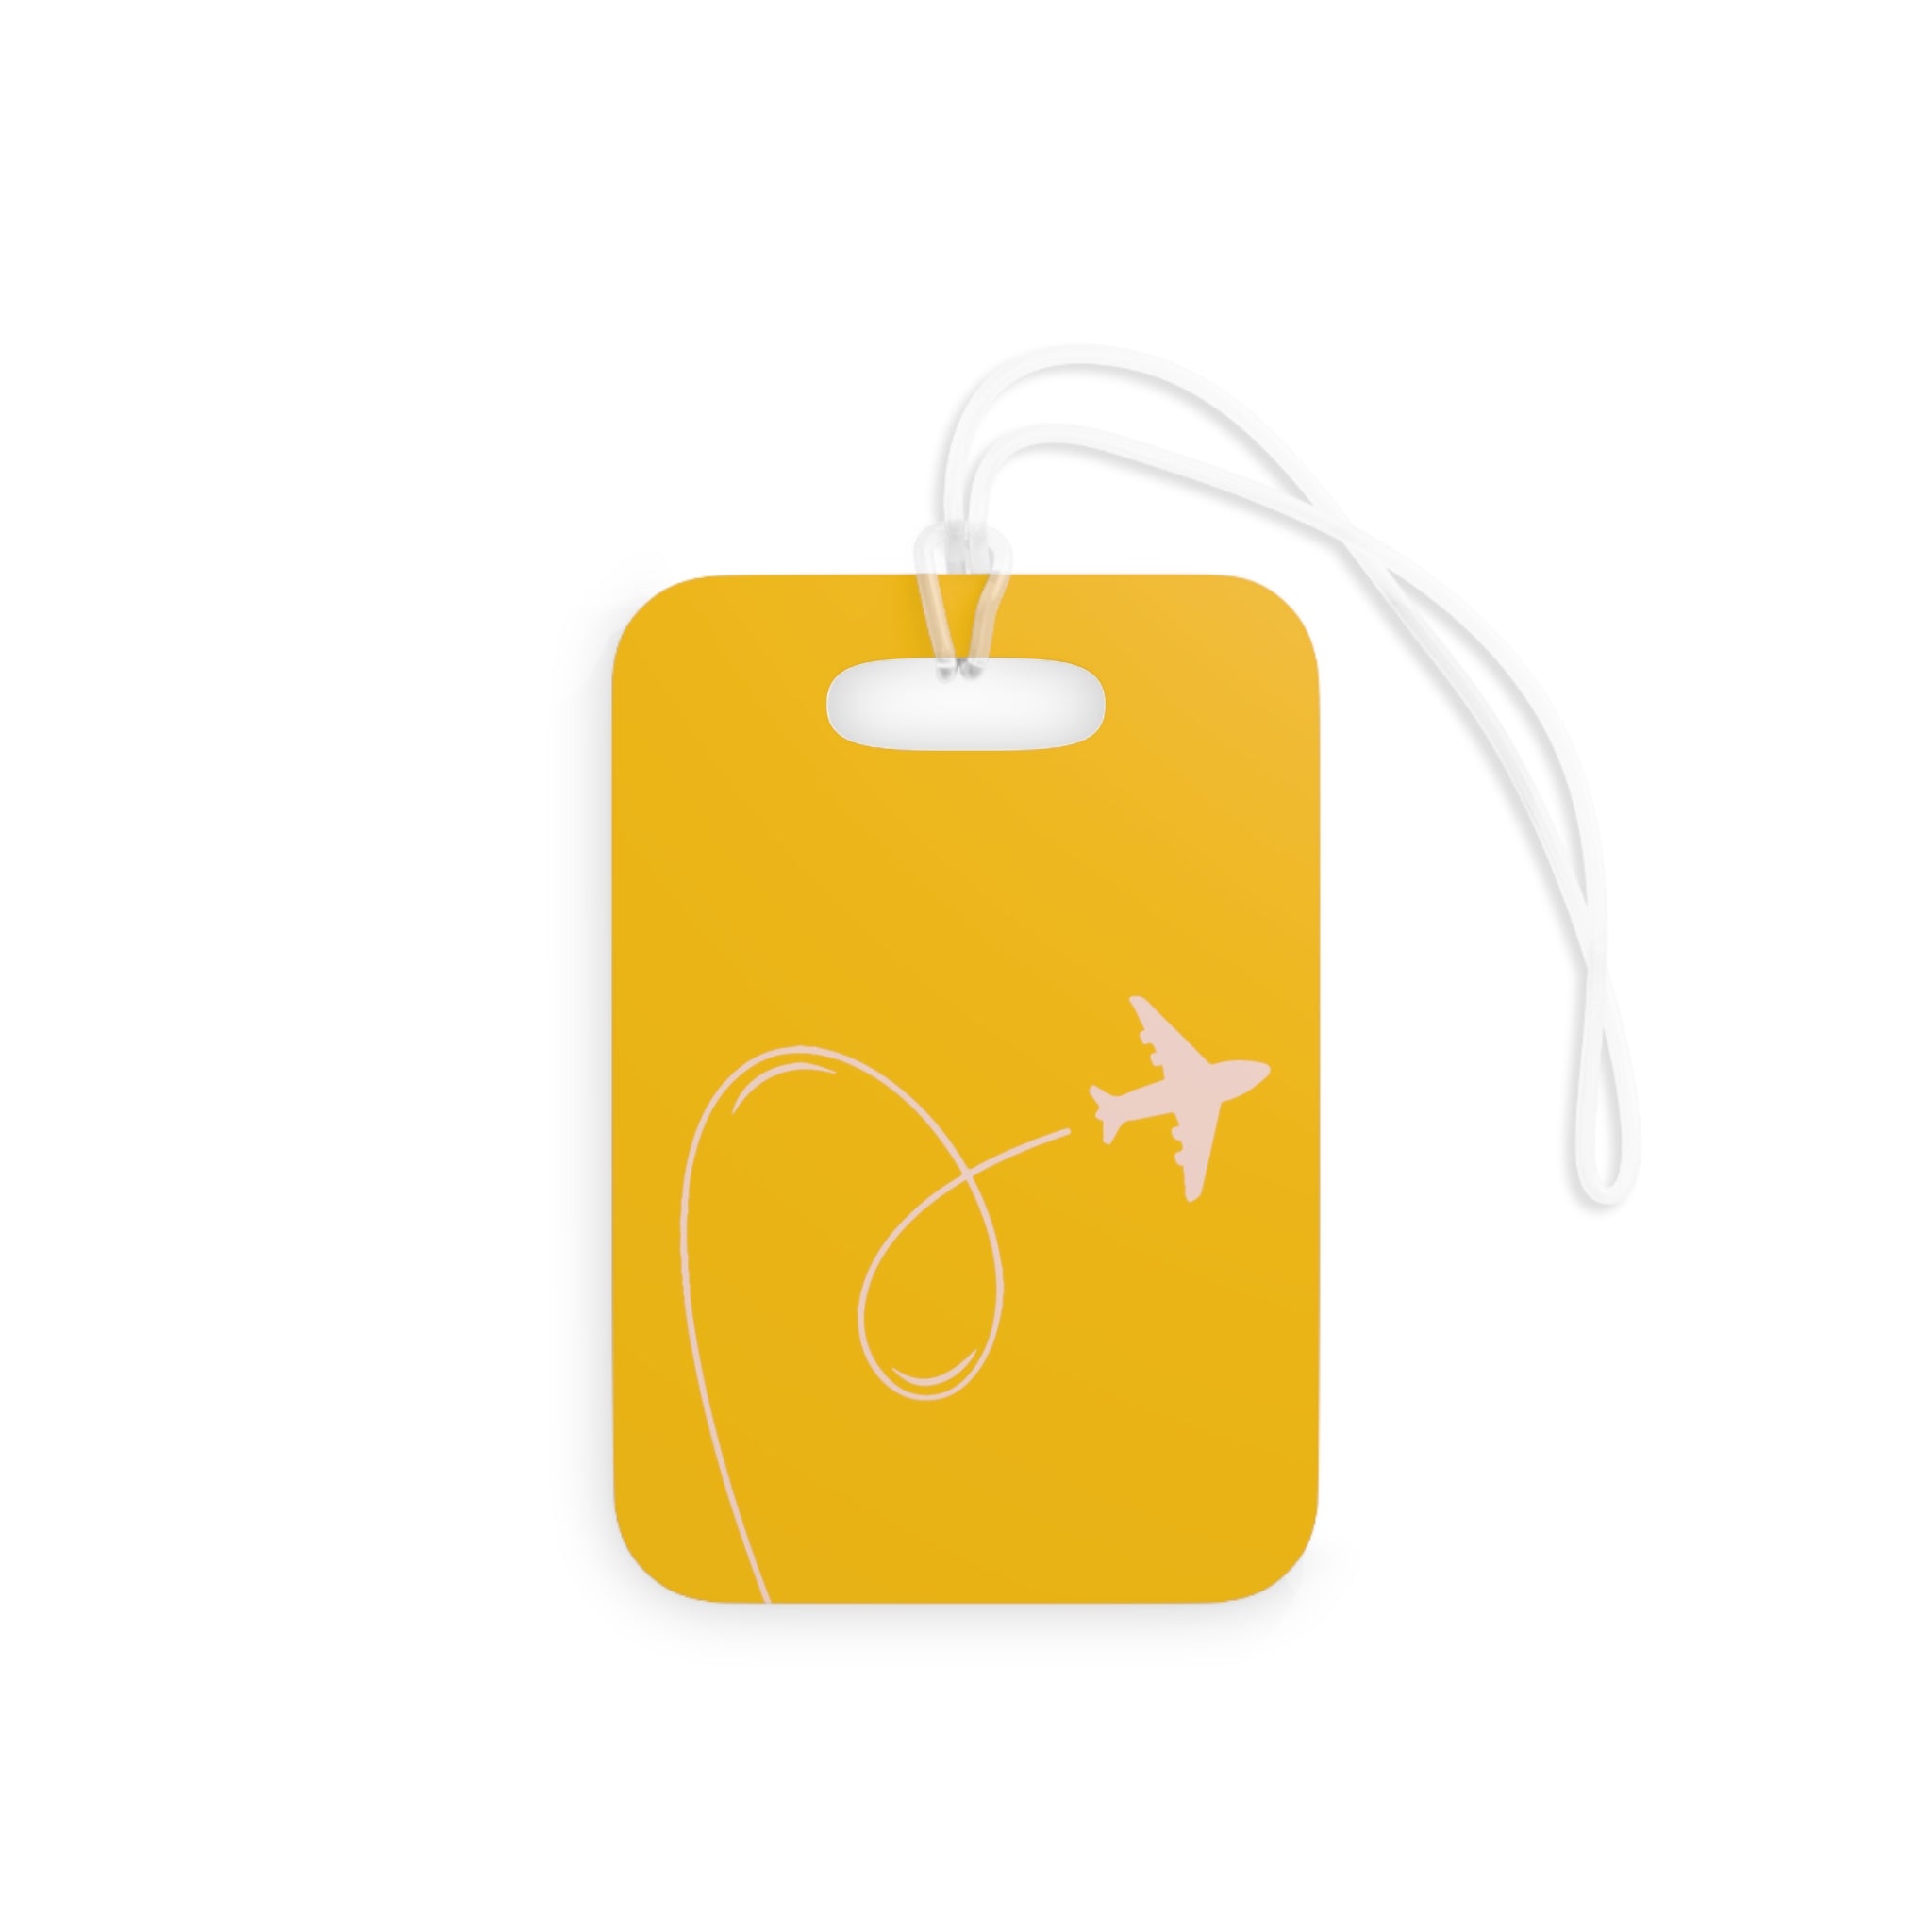 Love this journey for me Luggage Tag (Yellow)